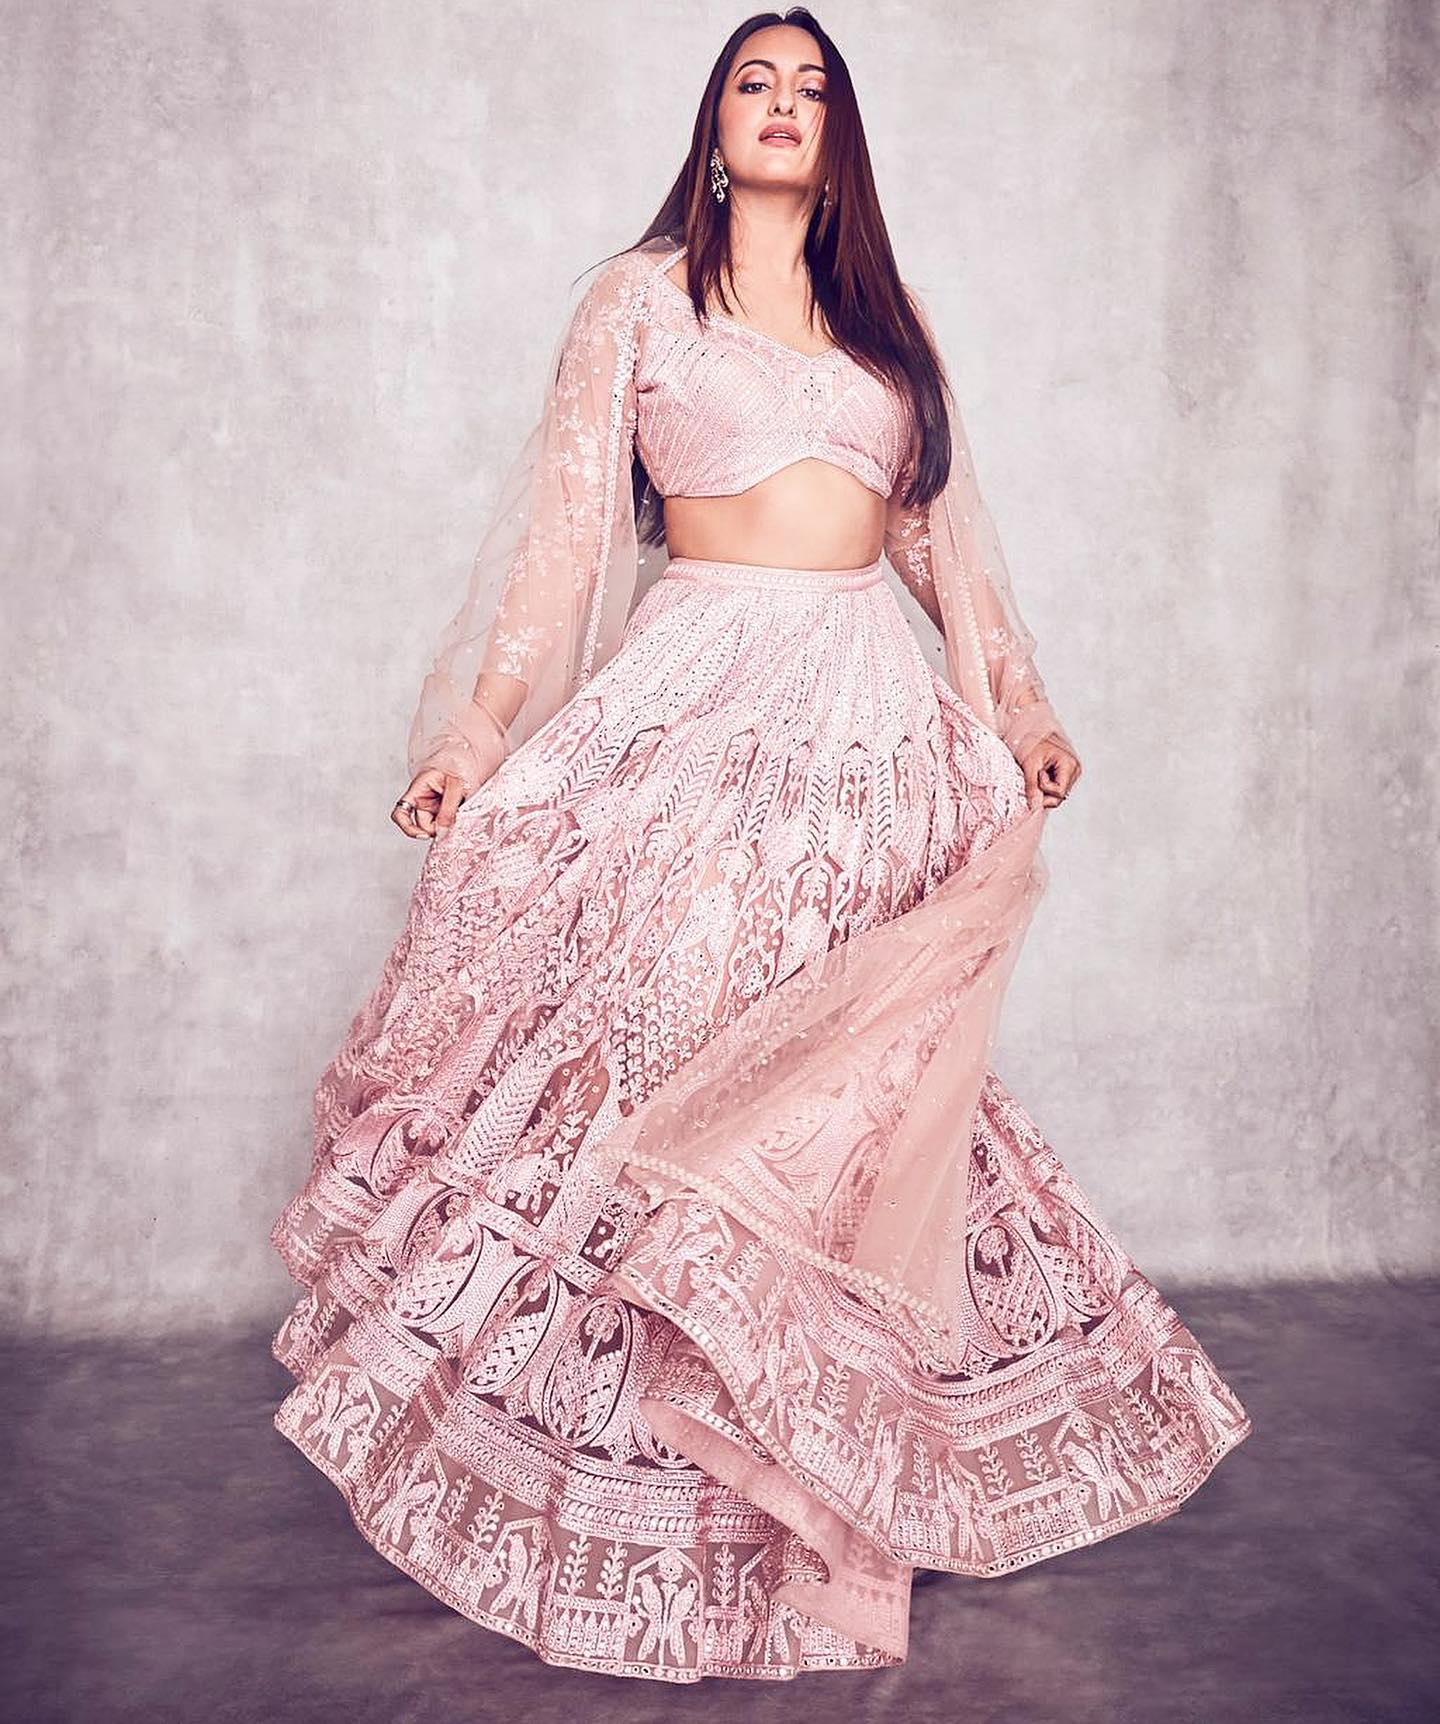 Sonakshi Sinha's Designer Lehenga With Butterfly Blouse For Wedding - Dresses, Sarees, Jewellery & More